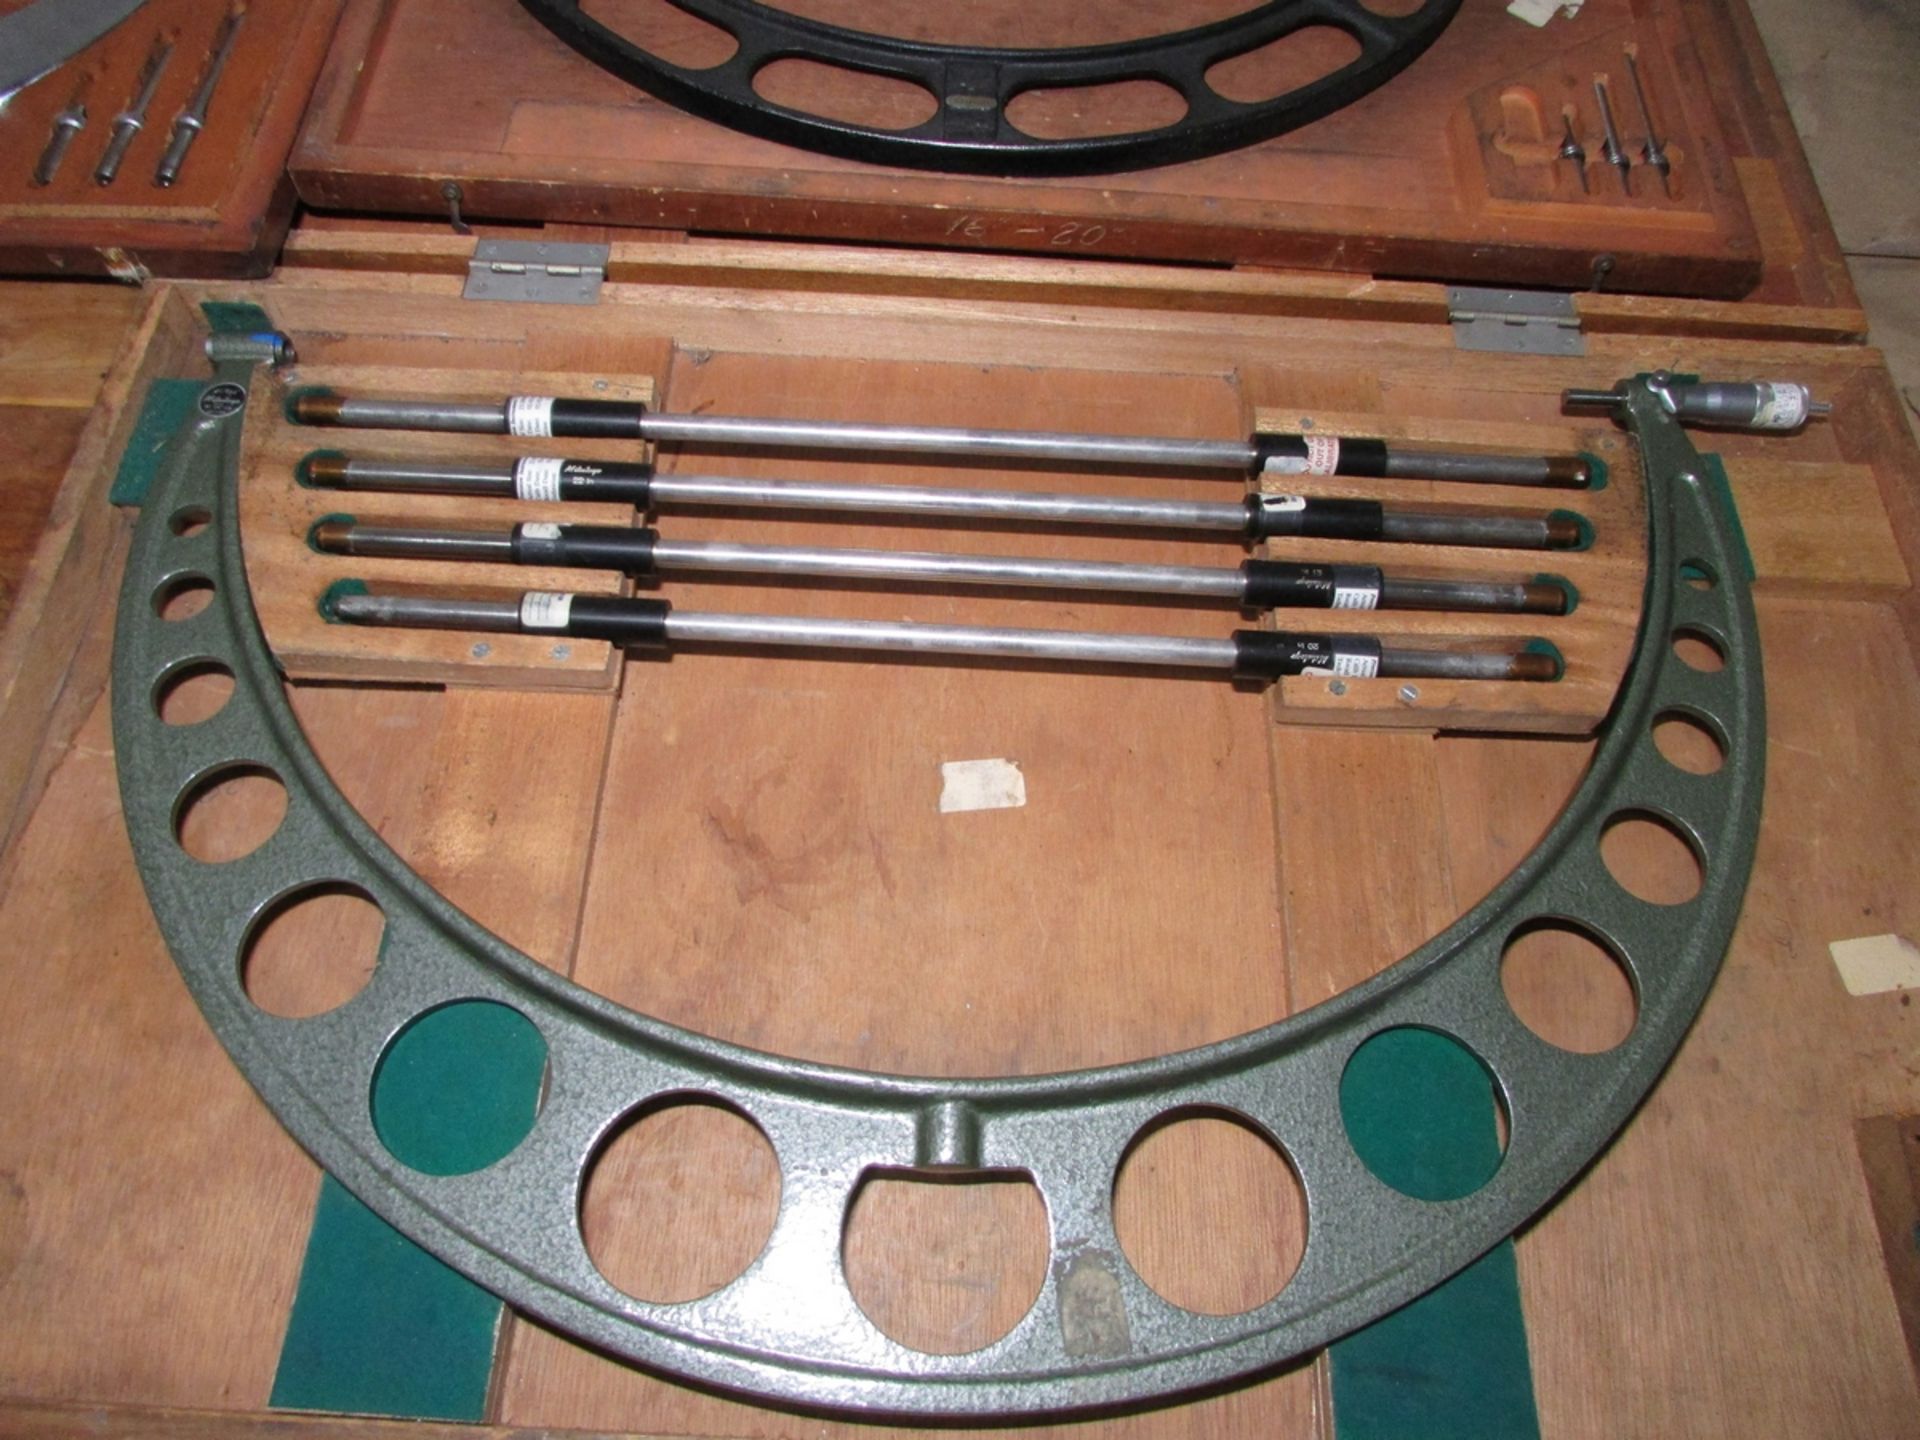 LOT - (4) OD MICROMETERS: (1) 6"-12", (1) 12"-16", (1) 16"-20", (1) 20"-24" - Image 5 of 5